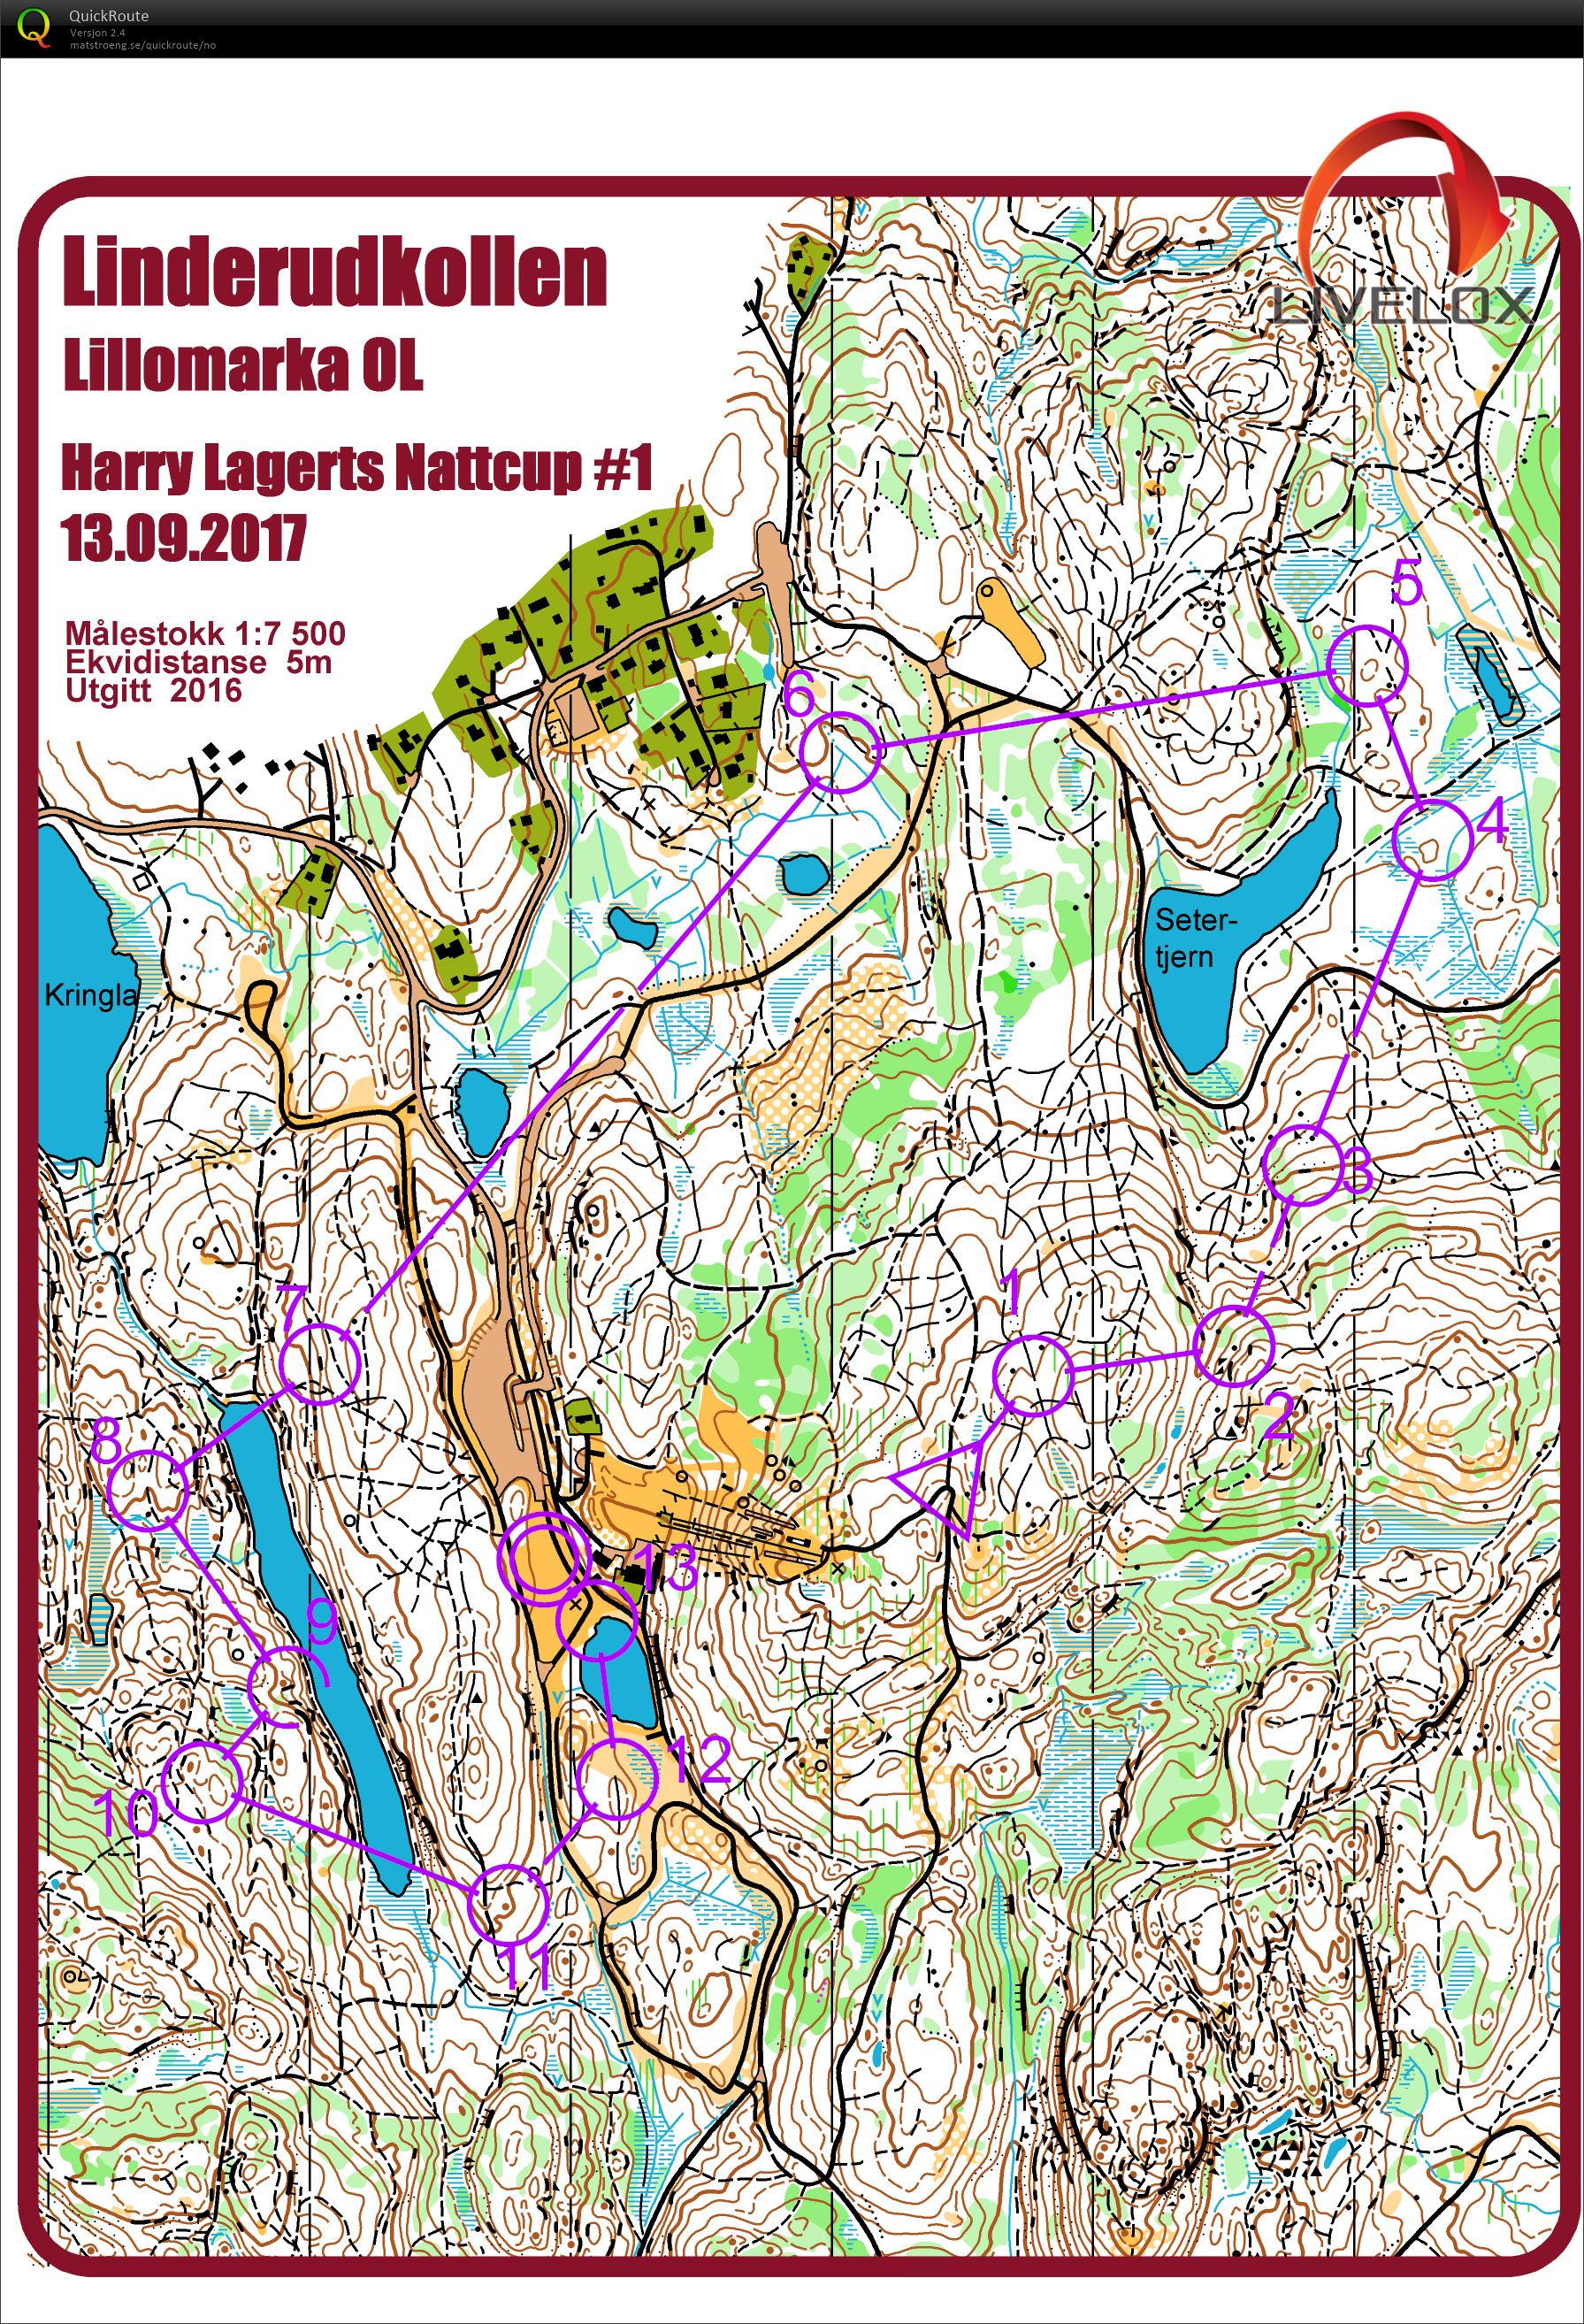 Harry Lagerts Nattcup #1 (2017-09-13)